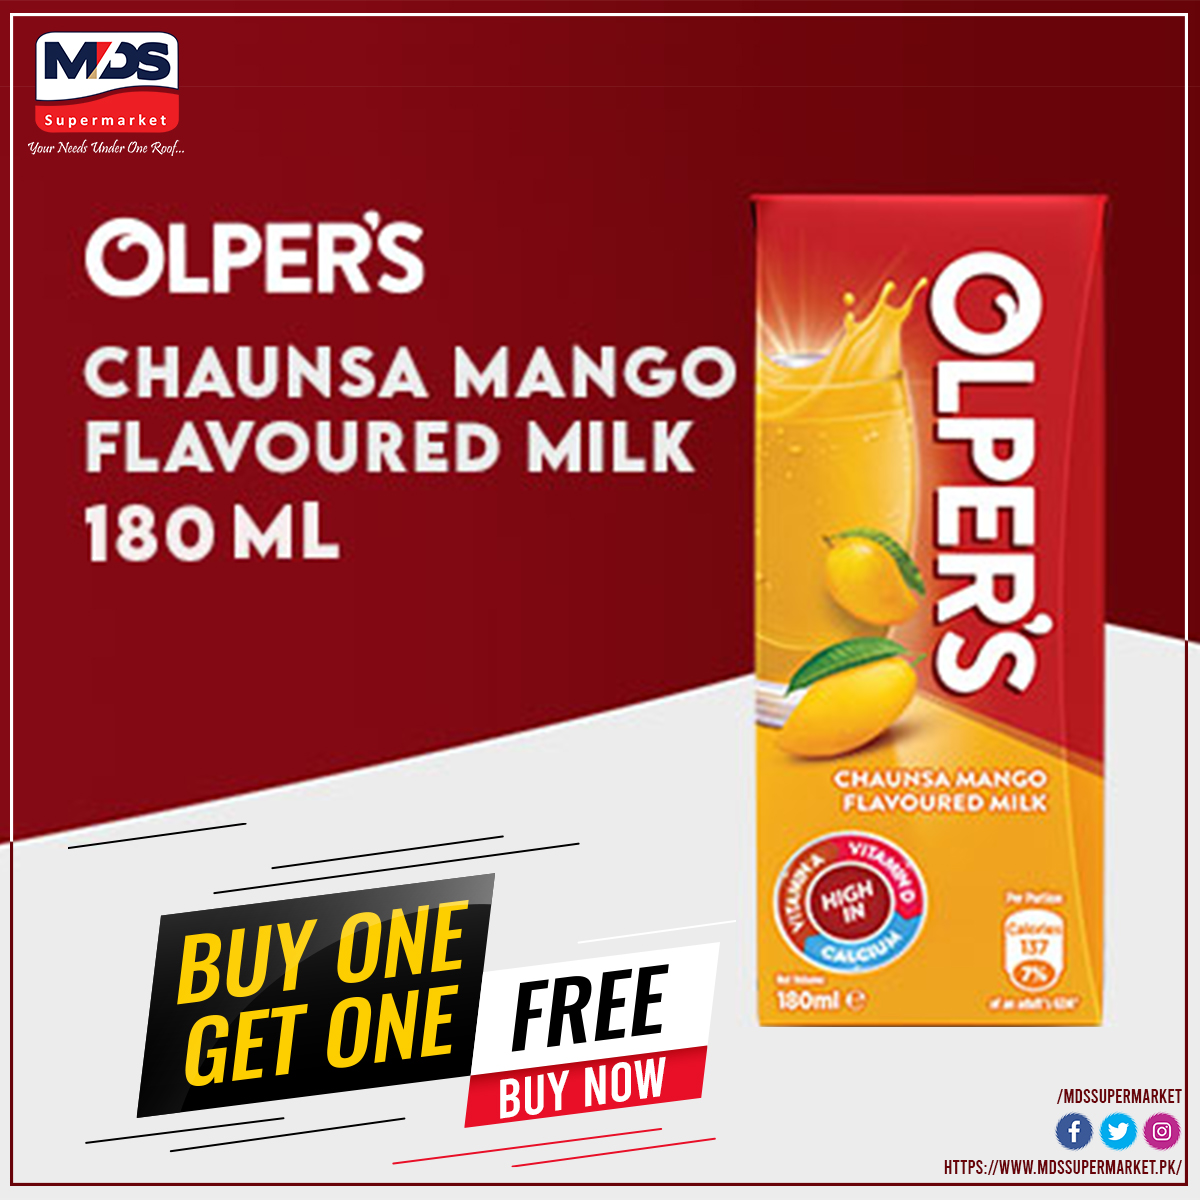 🛒 Avail the offer at our Branch 1 (Toghi Road) and double the delight! 🌐

📍 Location: Toghi Road Branch 🏠
📞 Phone: 0812-823444
🌐 Website: mdssupermarket.pk
📧 Email: info@mdssupermarket.pk

#OlpersJuice #MangoMania #BOGO #SpecialOffer #RefreshingMoments #MDSupermarket